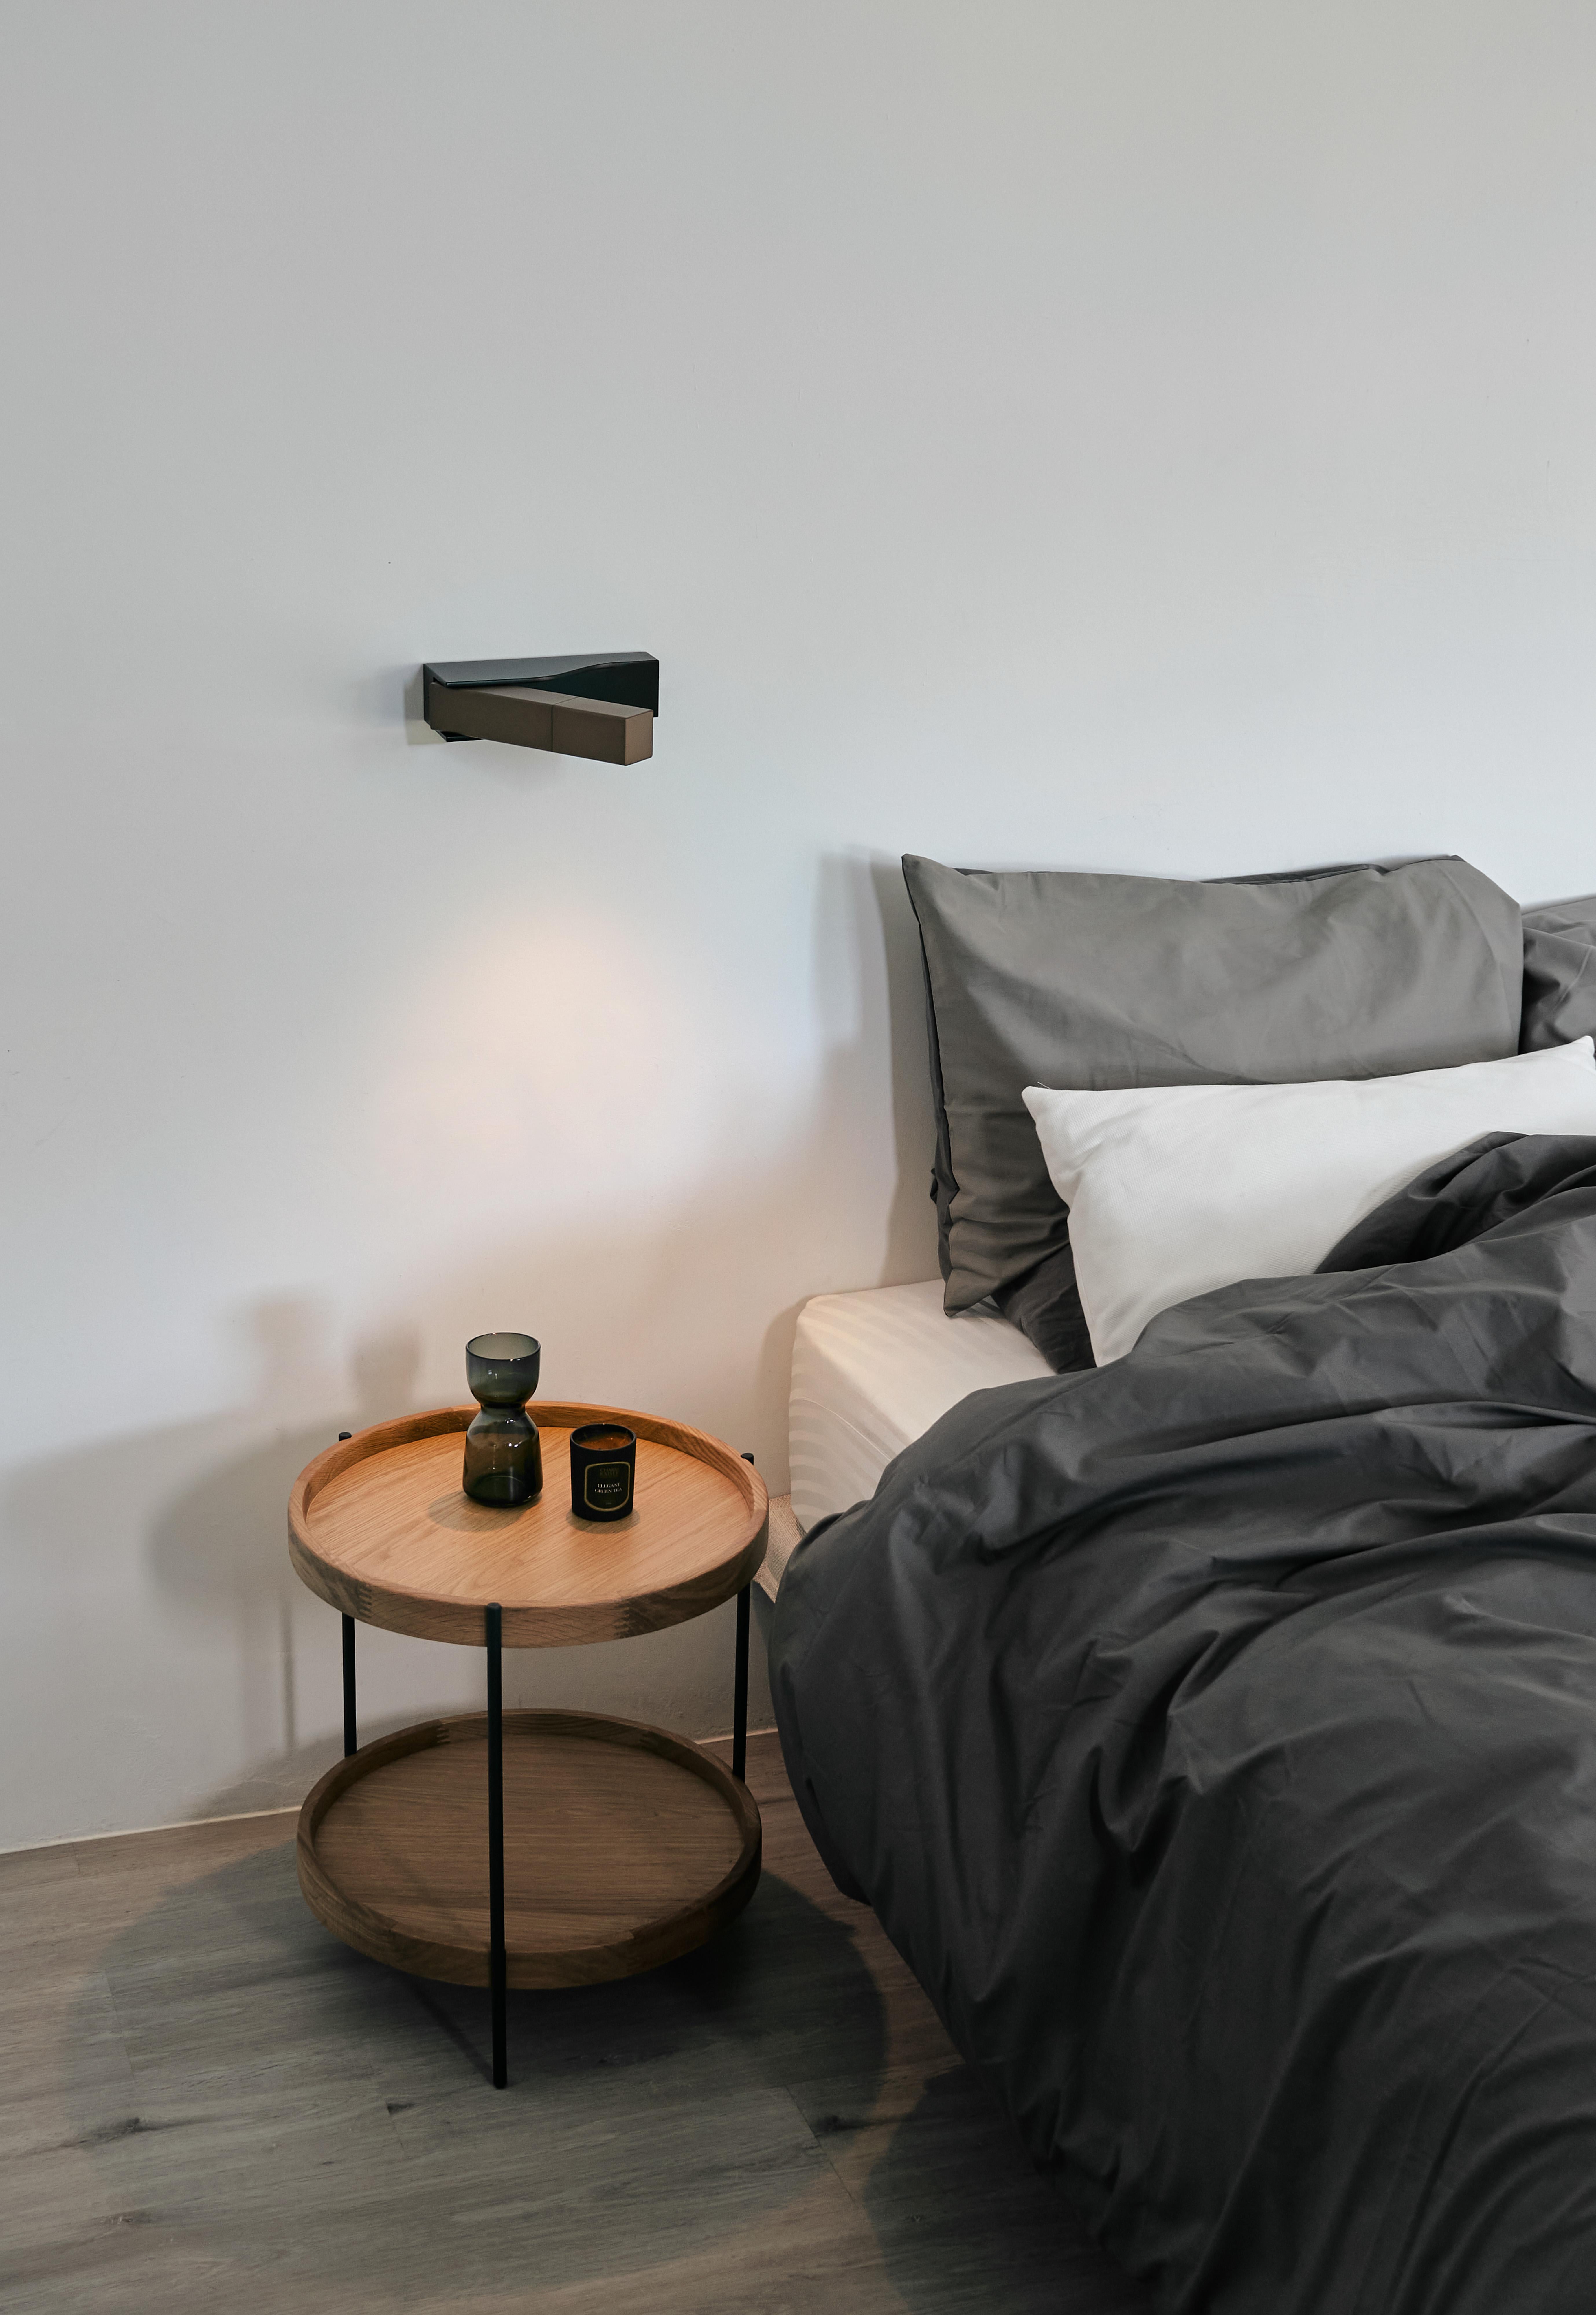 The WU wall sconce is designed with space saving and utmost functionality in mind. Despite its petite design, the WU does not compromise in function. It has two adjustable components: the lamp structure can rotate up to 180 degrees, while the